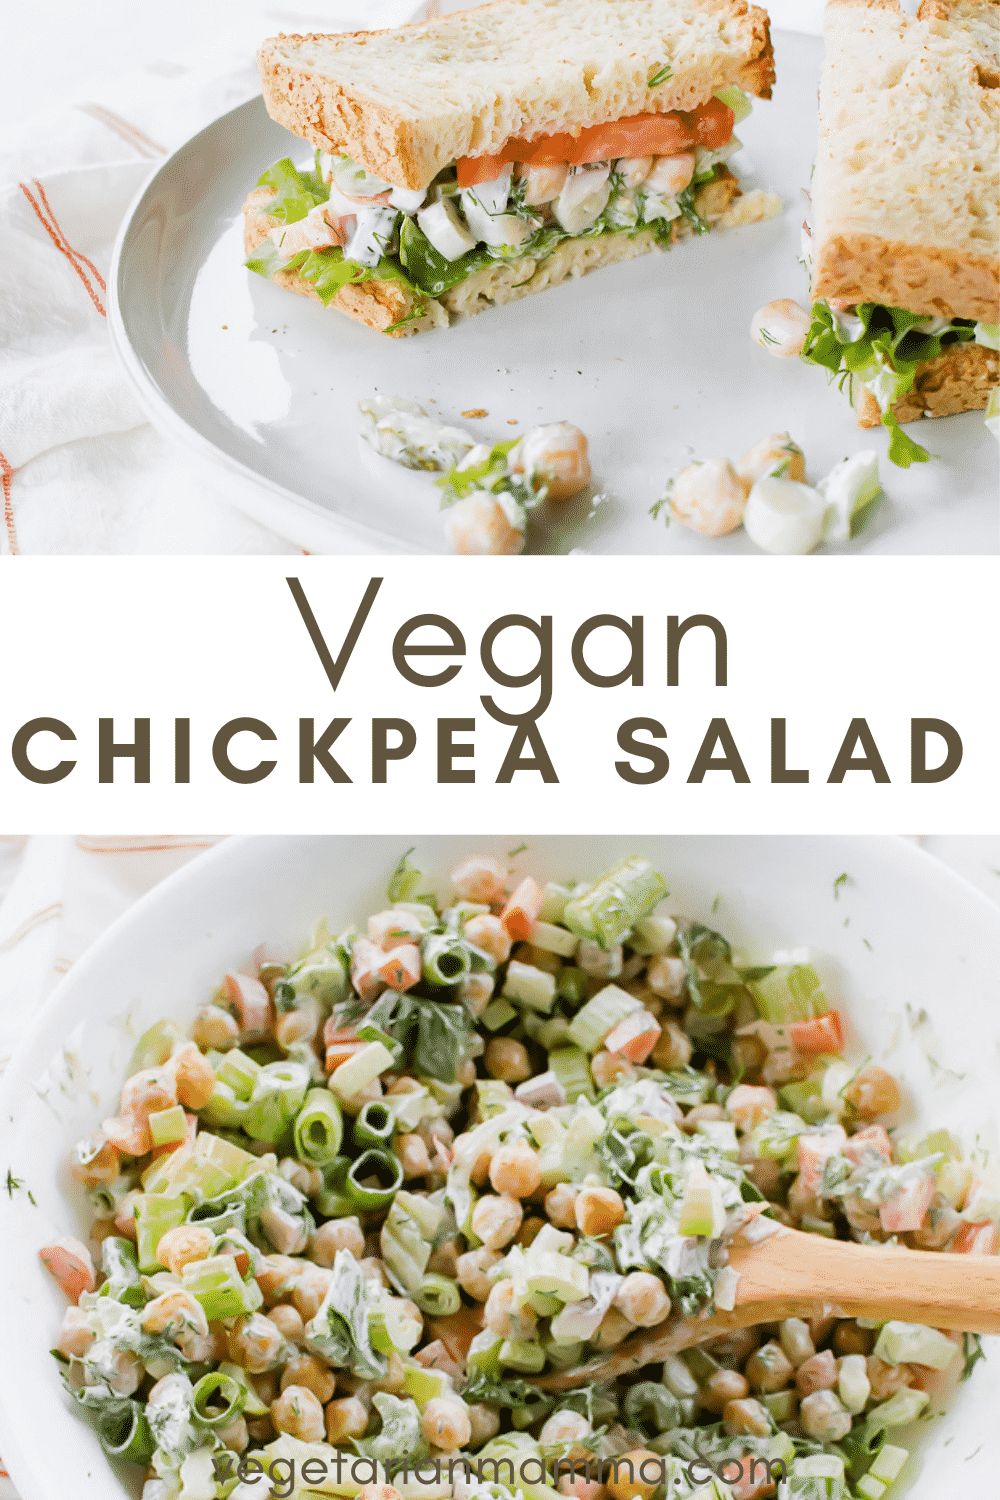 Vegan Chicken Salad is the best no-cook weeknight dinner! Pair it with soups in the winter or enjoy the cold chickpea salad plain in summer. #vegan #chickpeasalad #nocooking